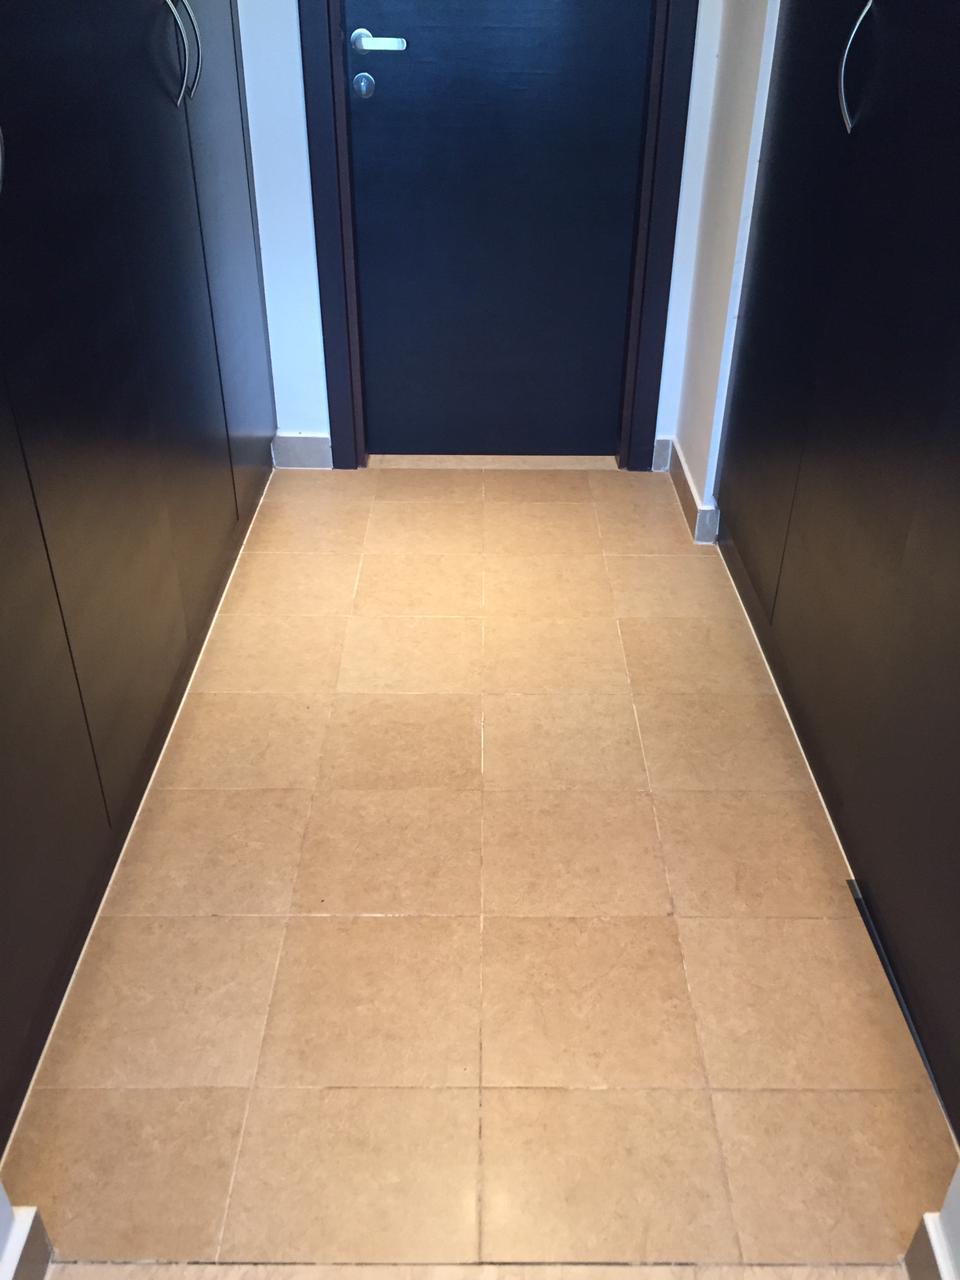 Grout Cleaning Restoration Enviro Clean